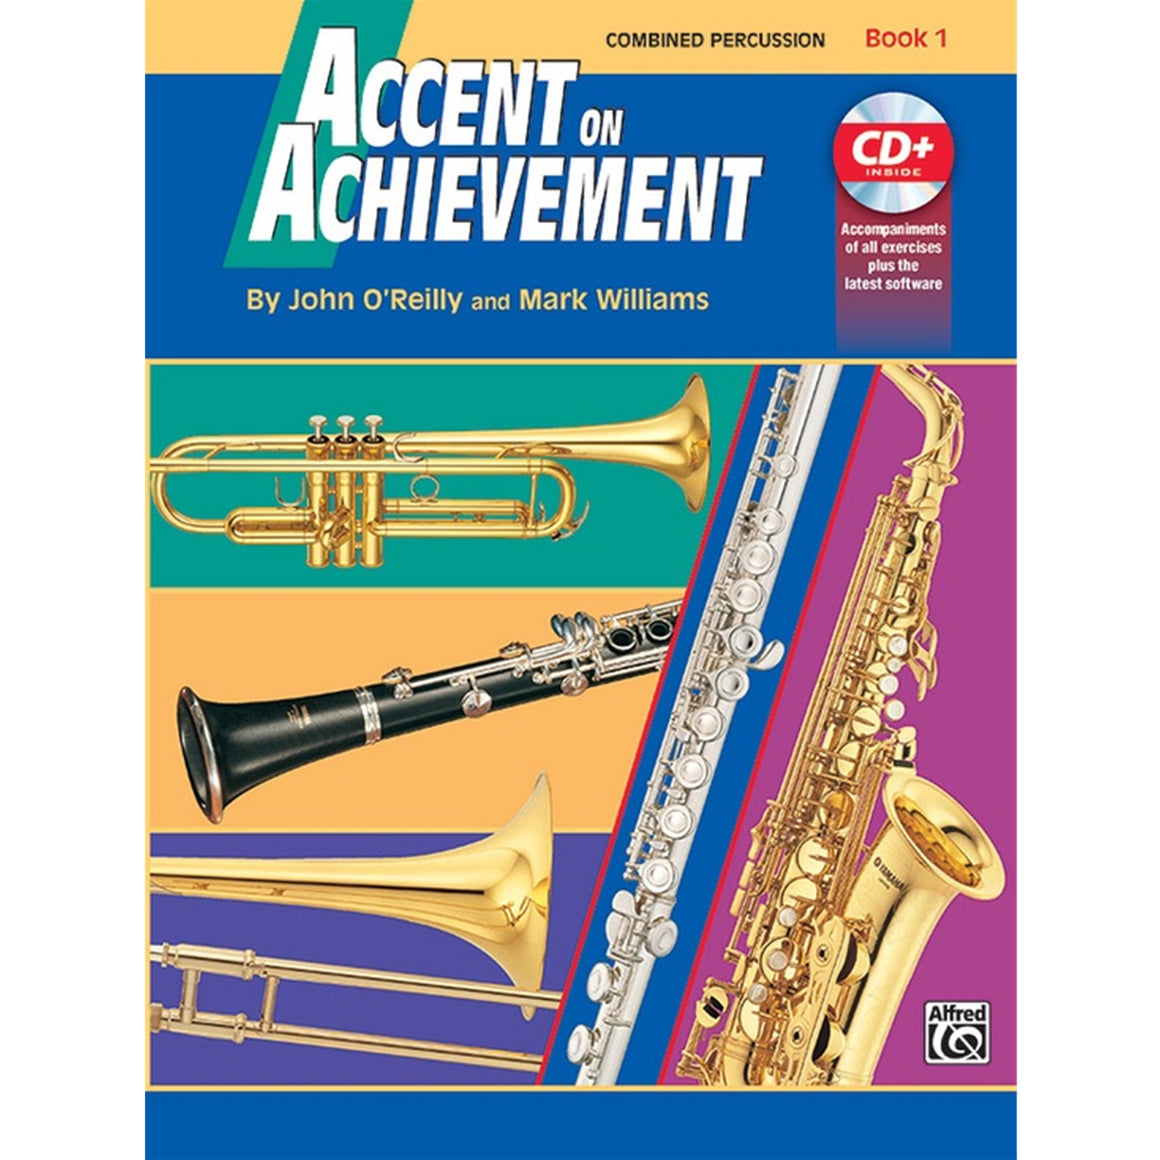 ALFRED 17099 Accent on Achievement, Book 1 [Combined Percussion S.D., B.D., Access. & Mallet Percussion]